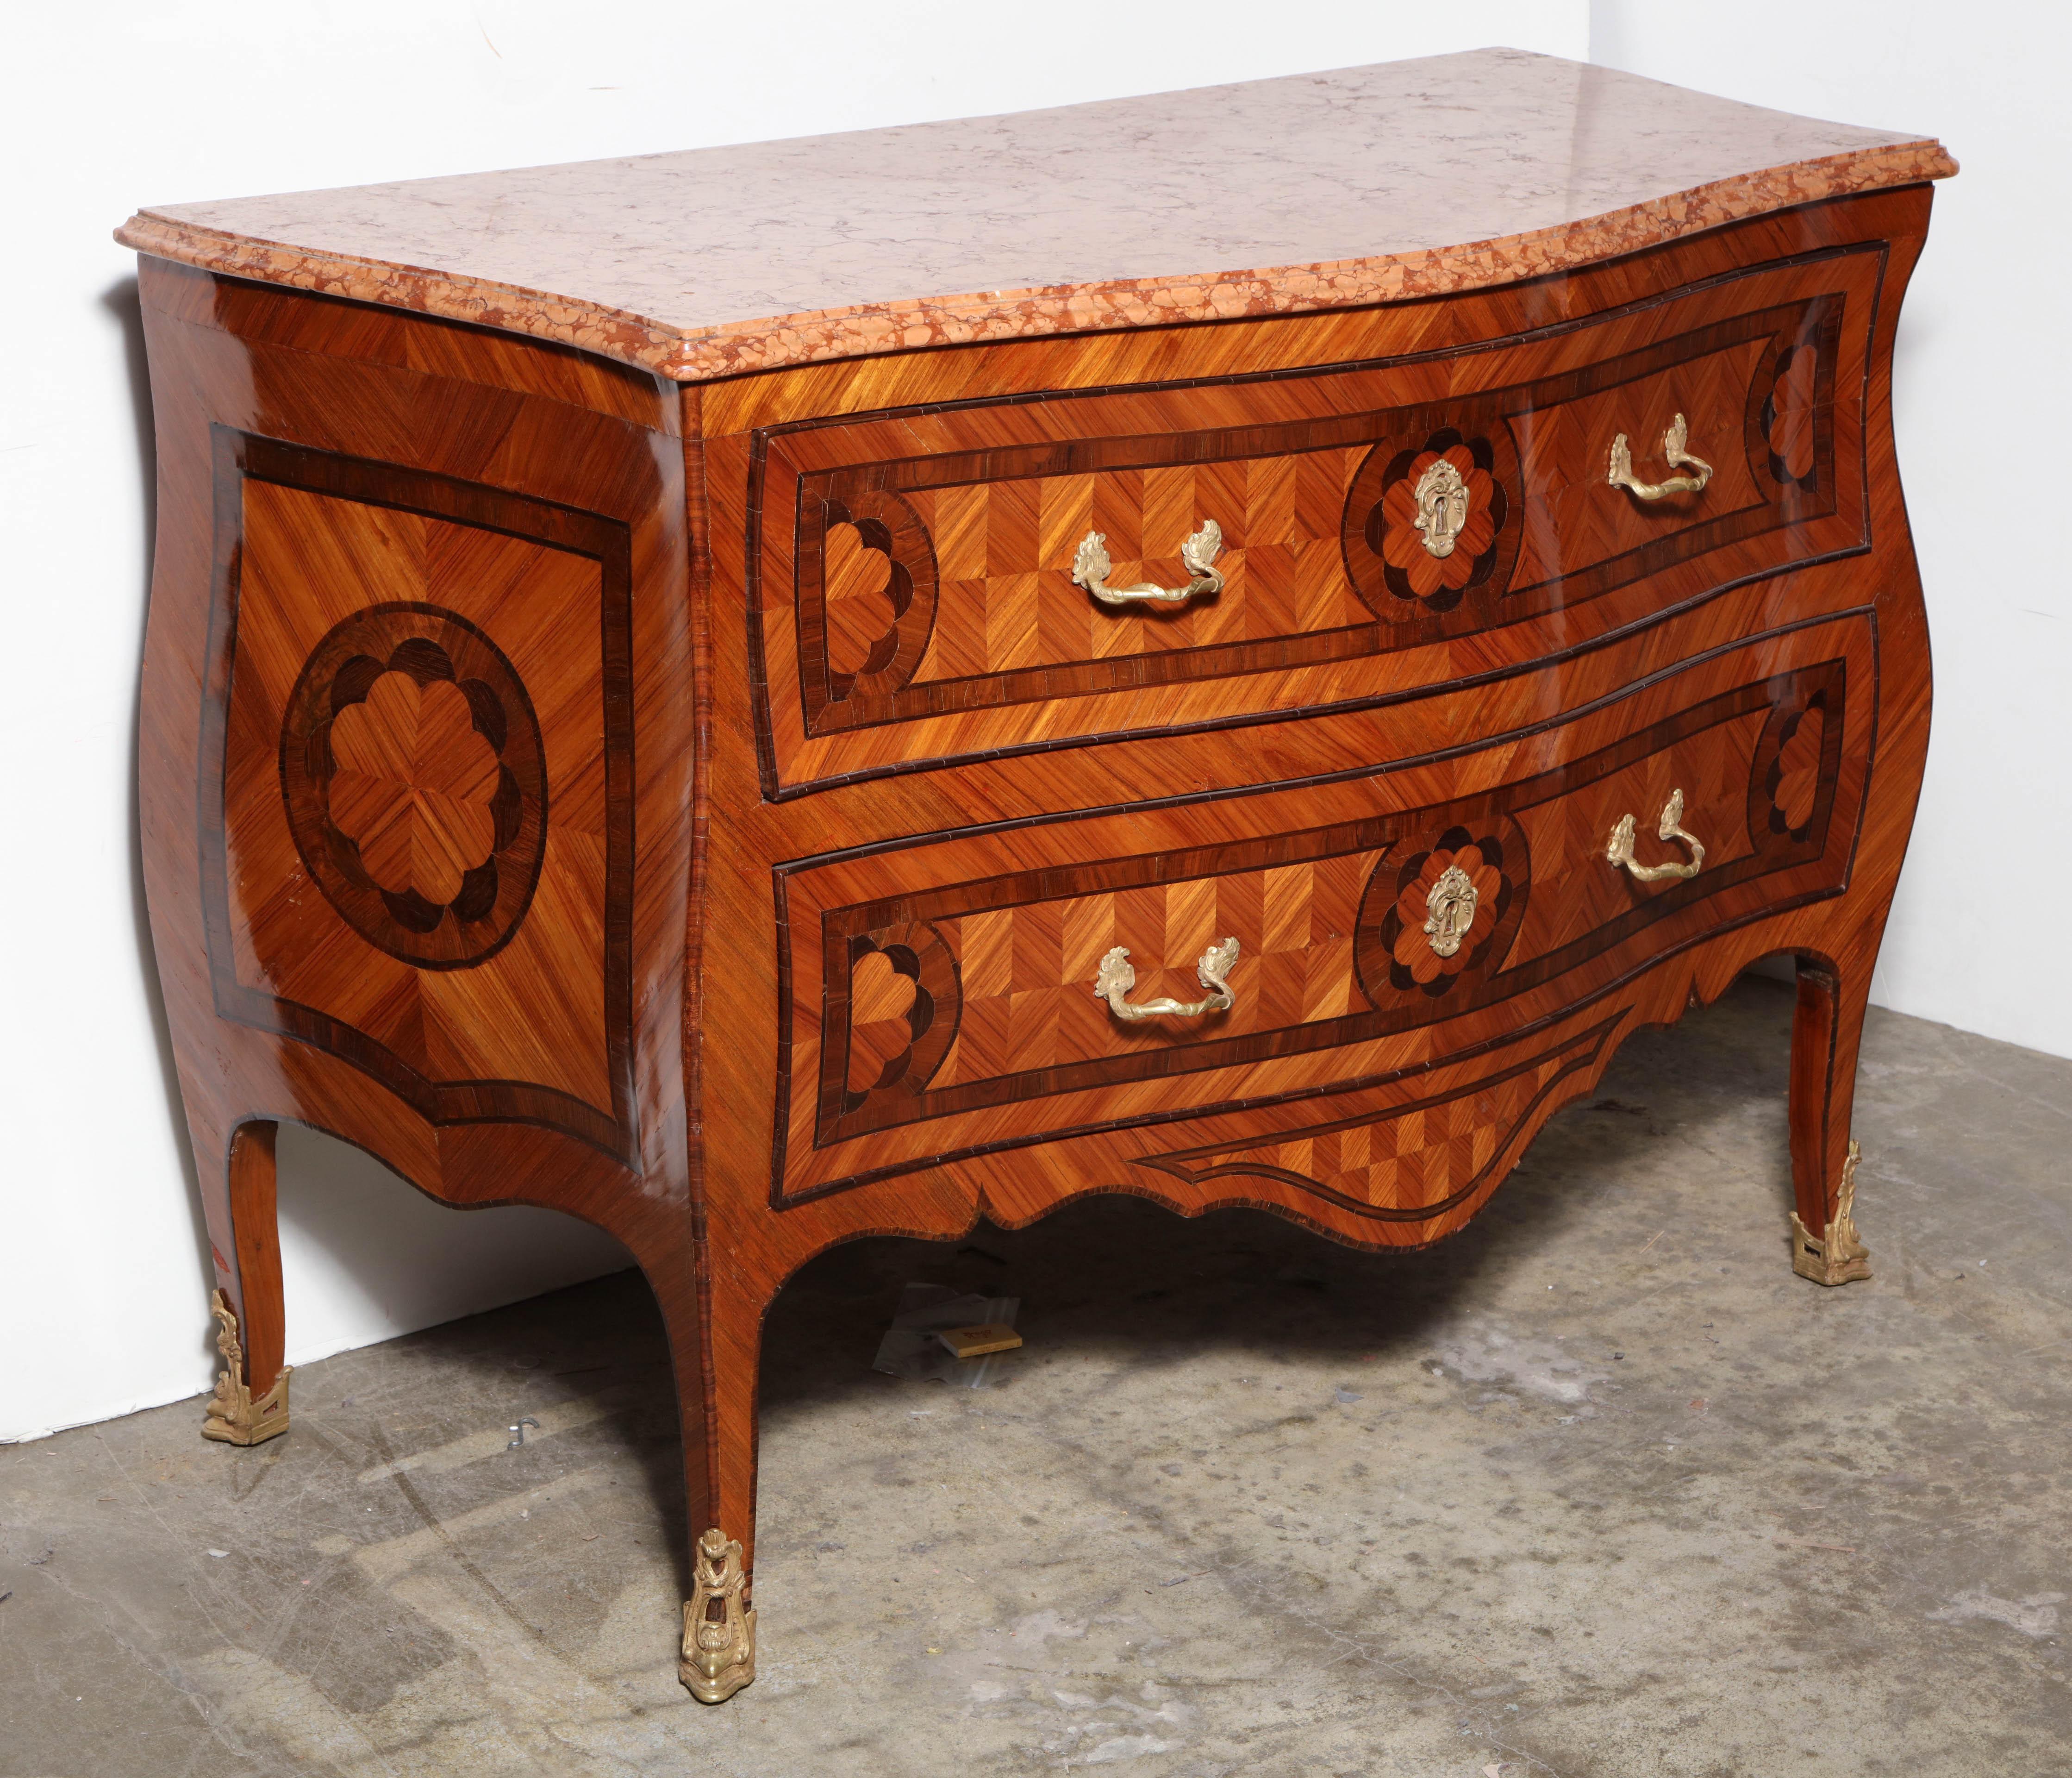 Italian Louis XV marble top bombe and serpentine two-drawer commode with parquetry inlays, bronze mounts and sabots.